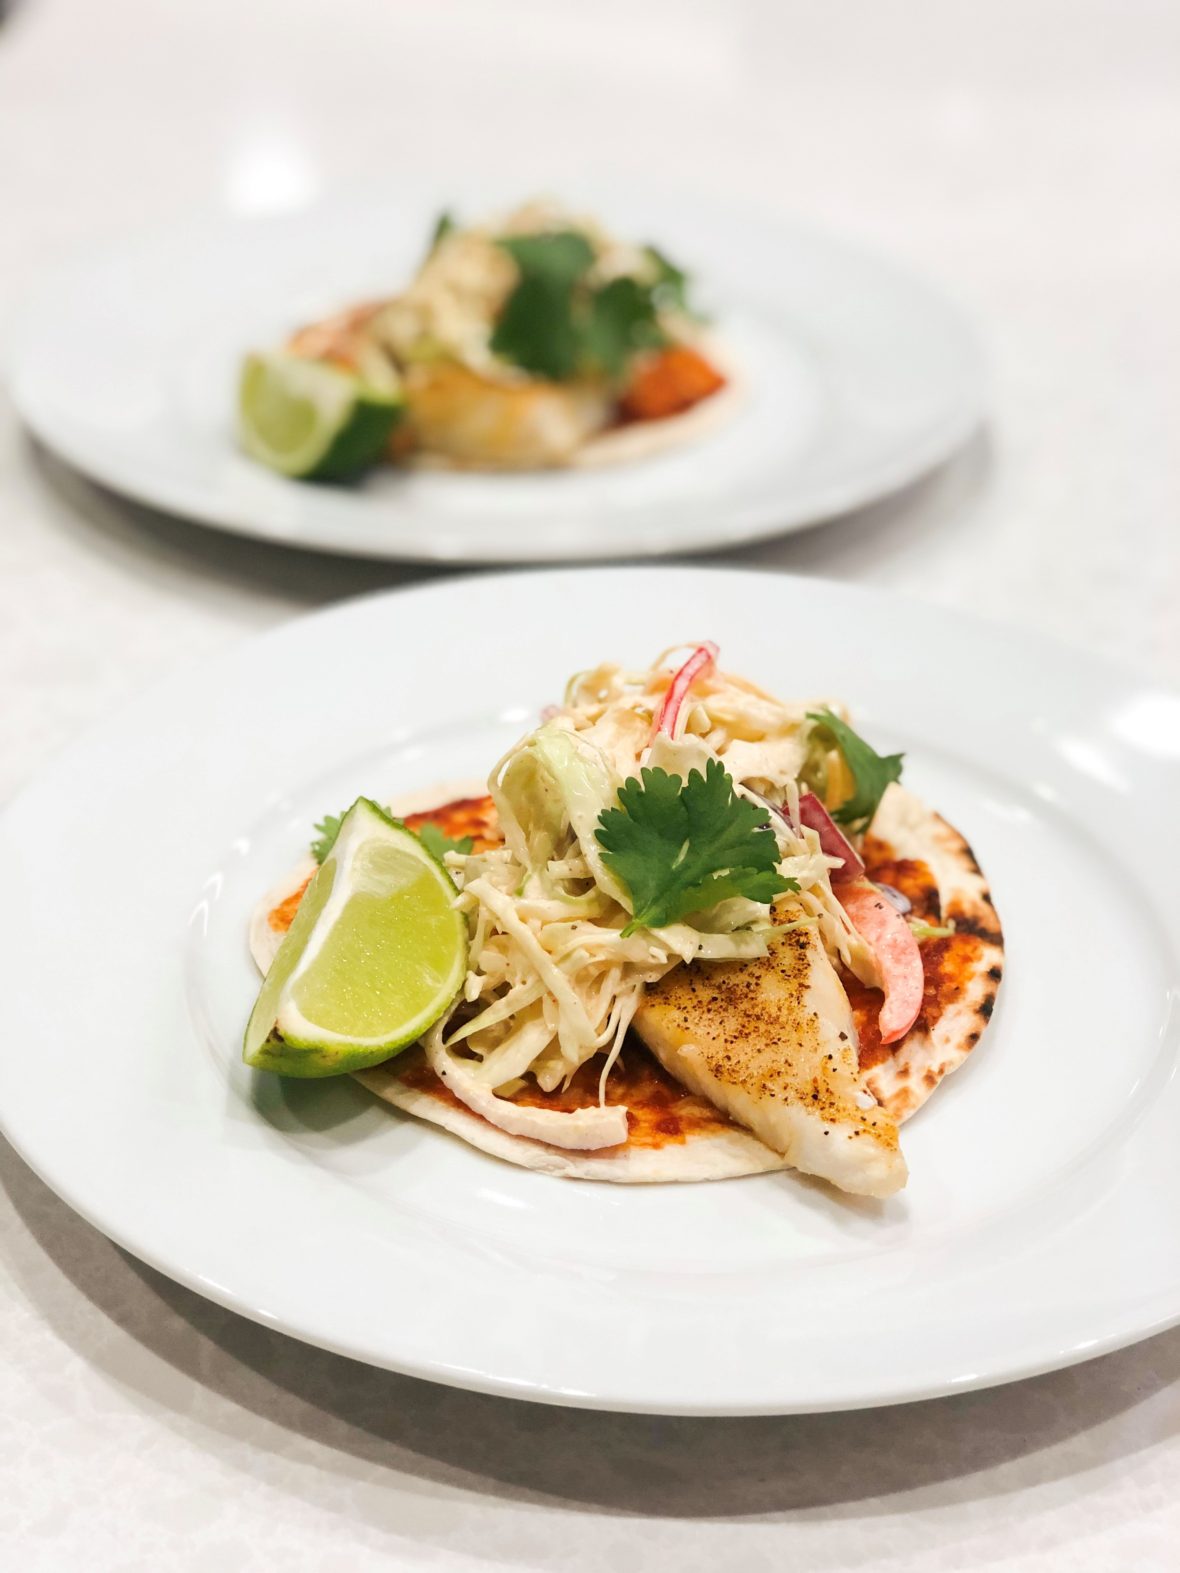 Spicy Fish Tacos with Lemon-Chipotle Slaw | Tisdel Distributing